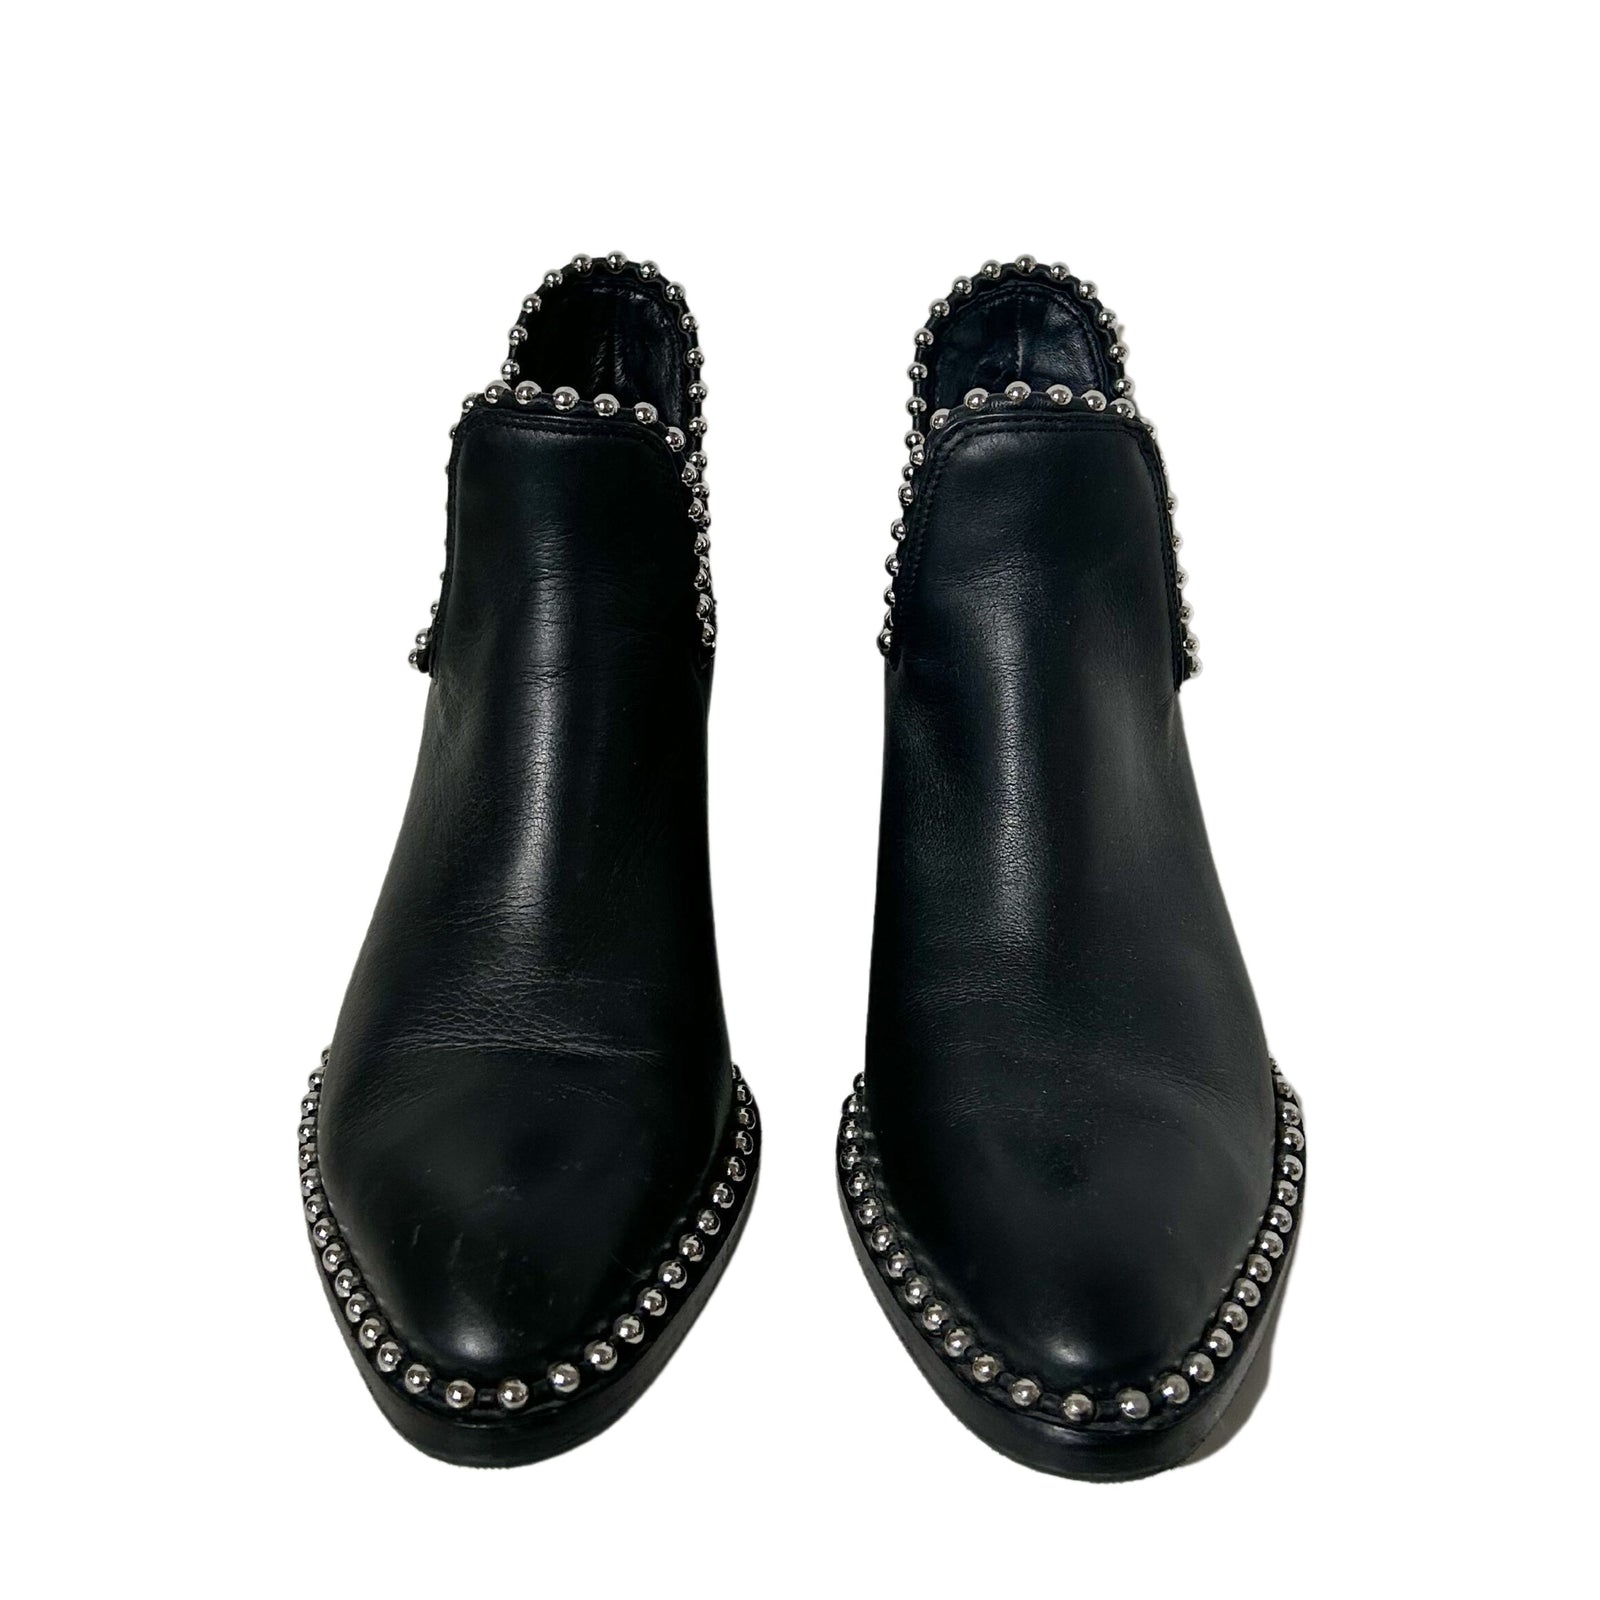 Ankle Boots 39